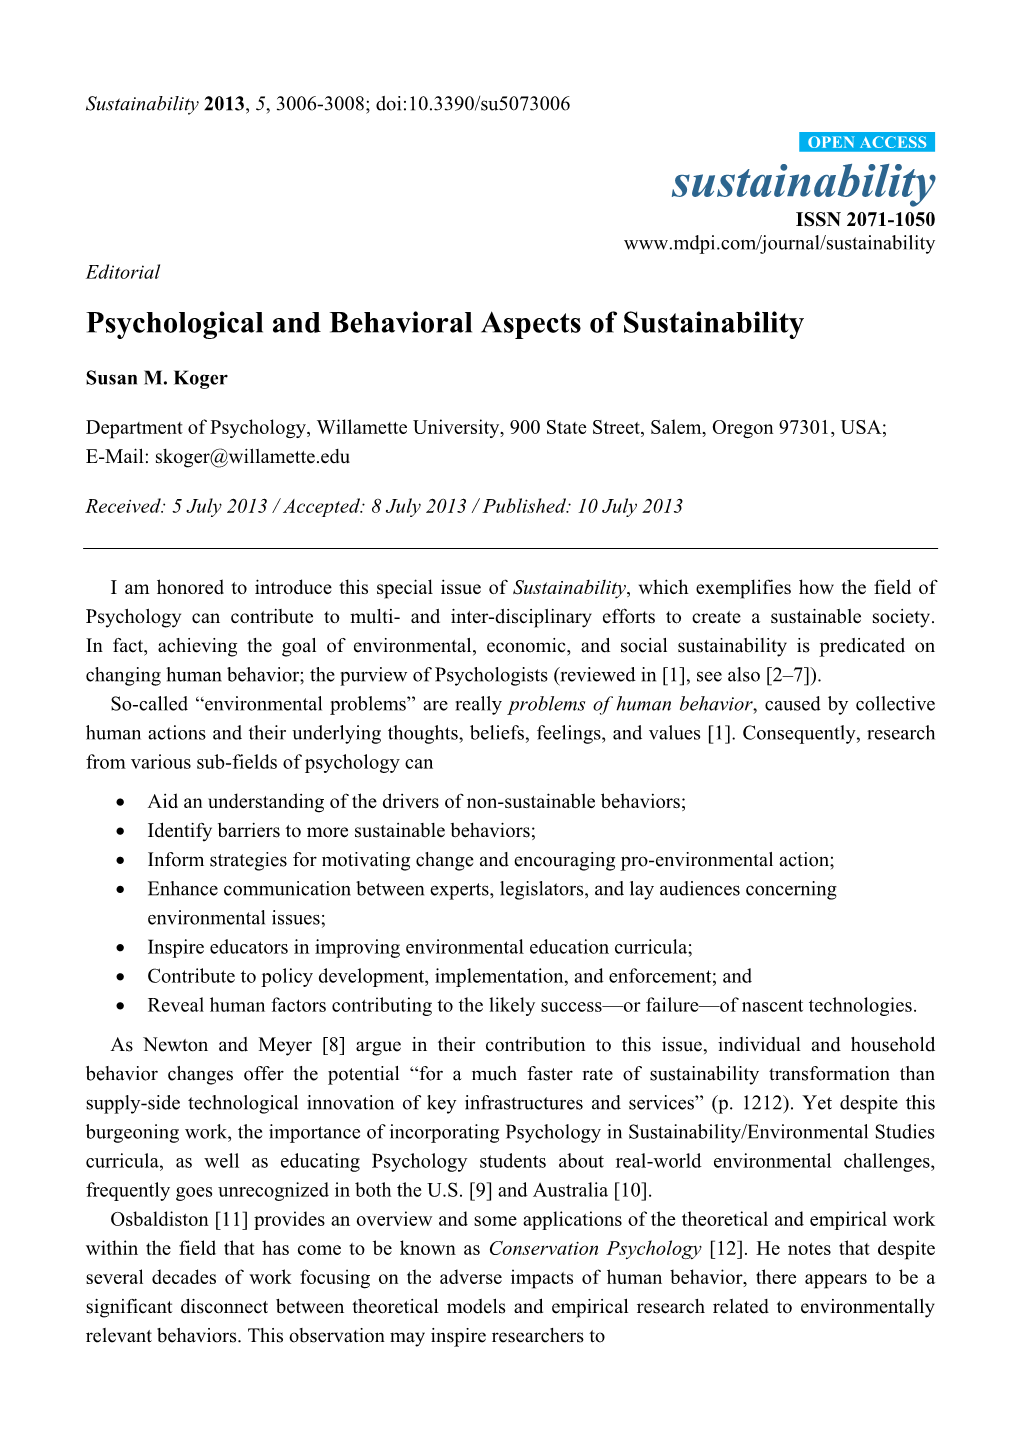 Psychological and Behavioral Aspects of Sustainability